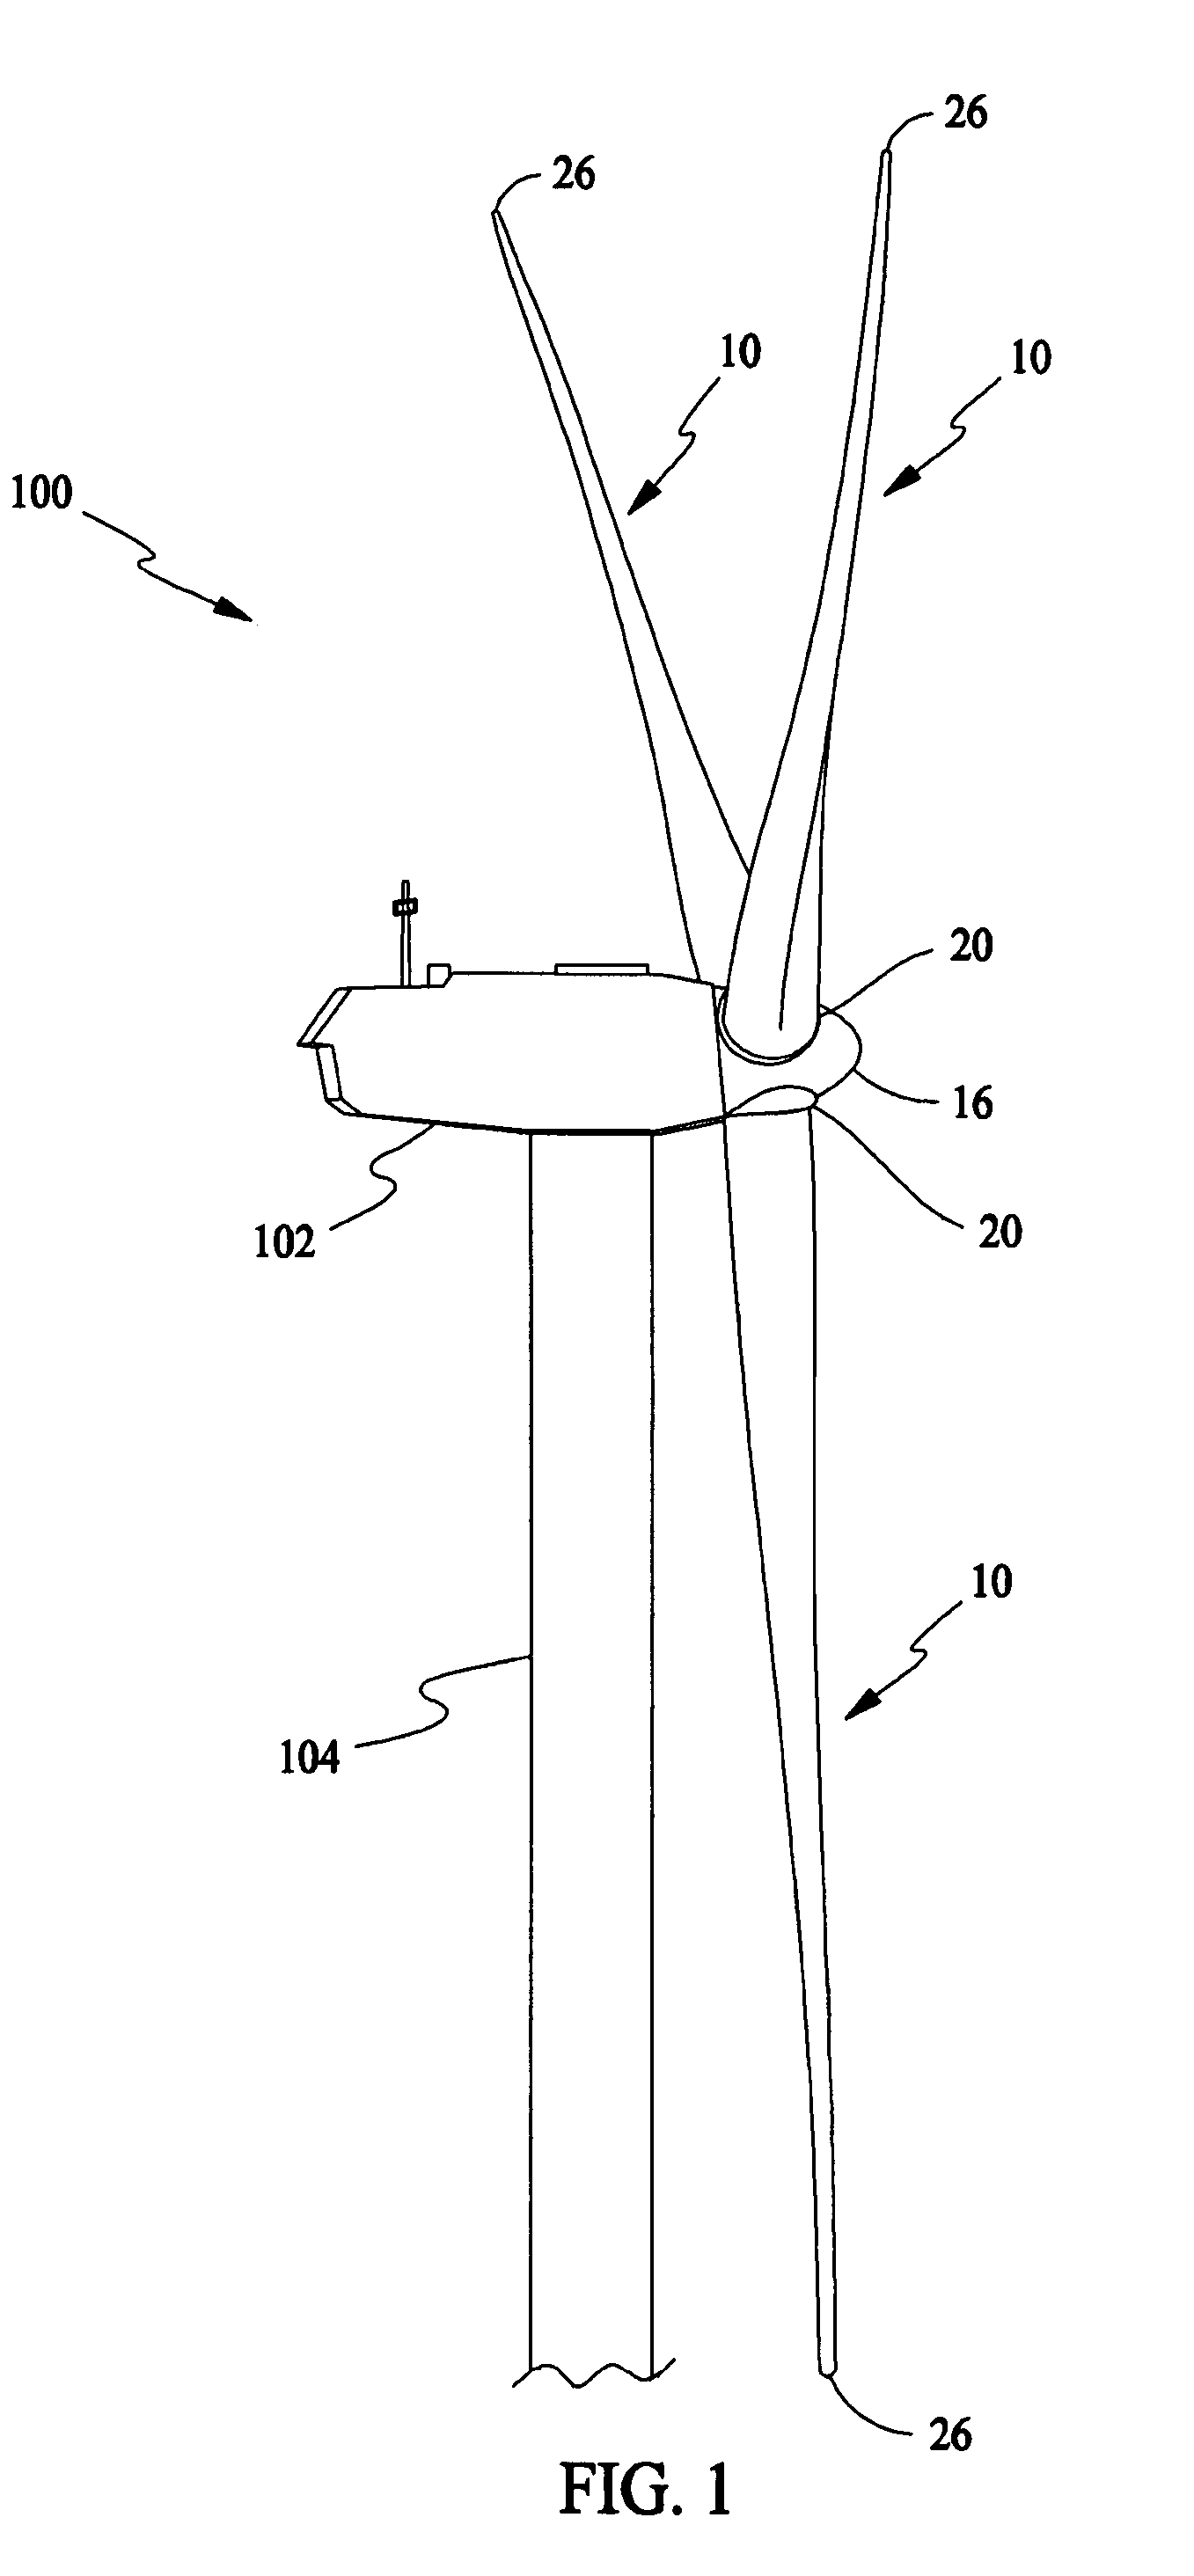 Methods and apparatus for deicing airfoils or rotor blades